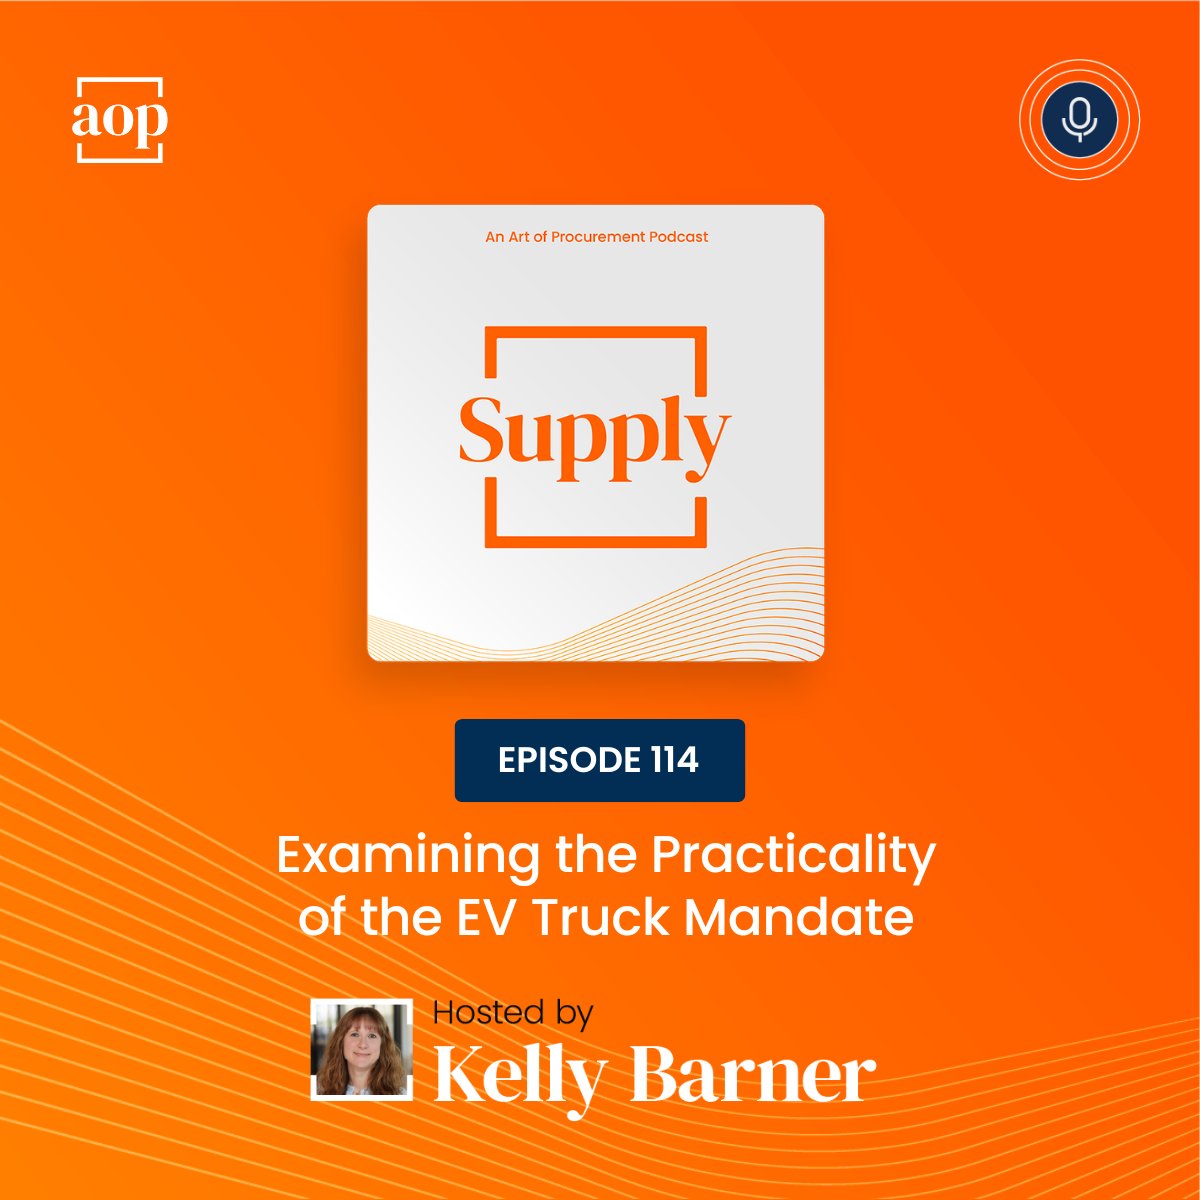 Now playing on Art of Supply: Examining the Practicality of the EV Heavy-Duty Truck Mandate artofprocurement.com/supply/examini… #SupplyChains #emissions #regulation